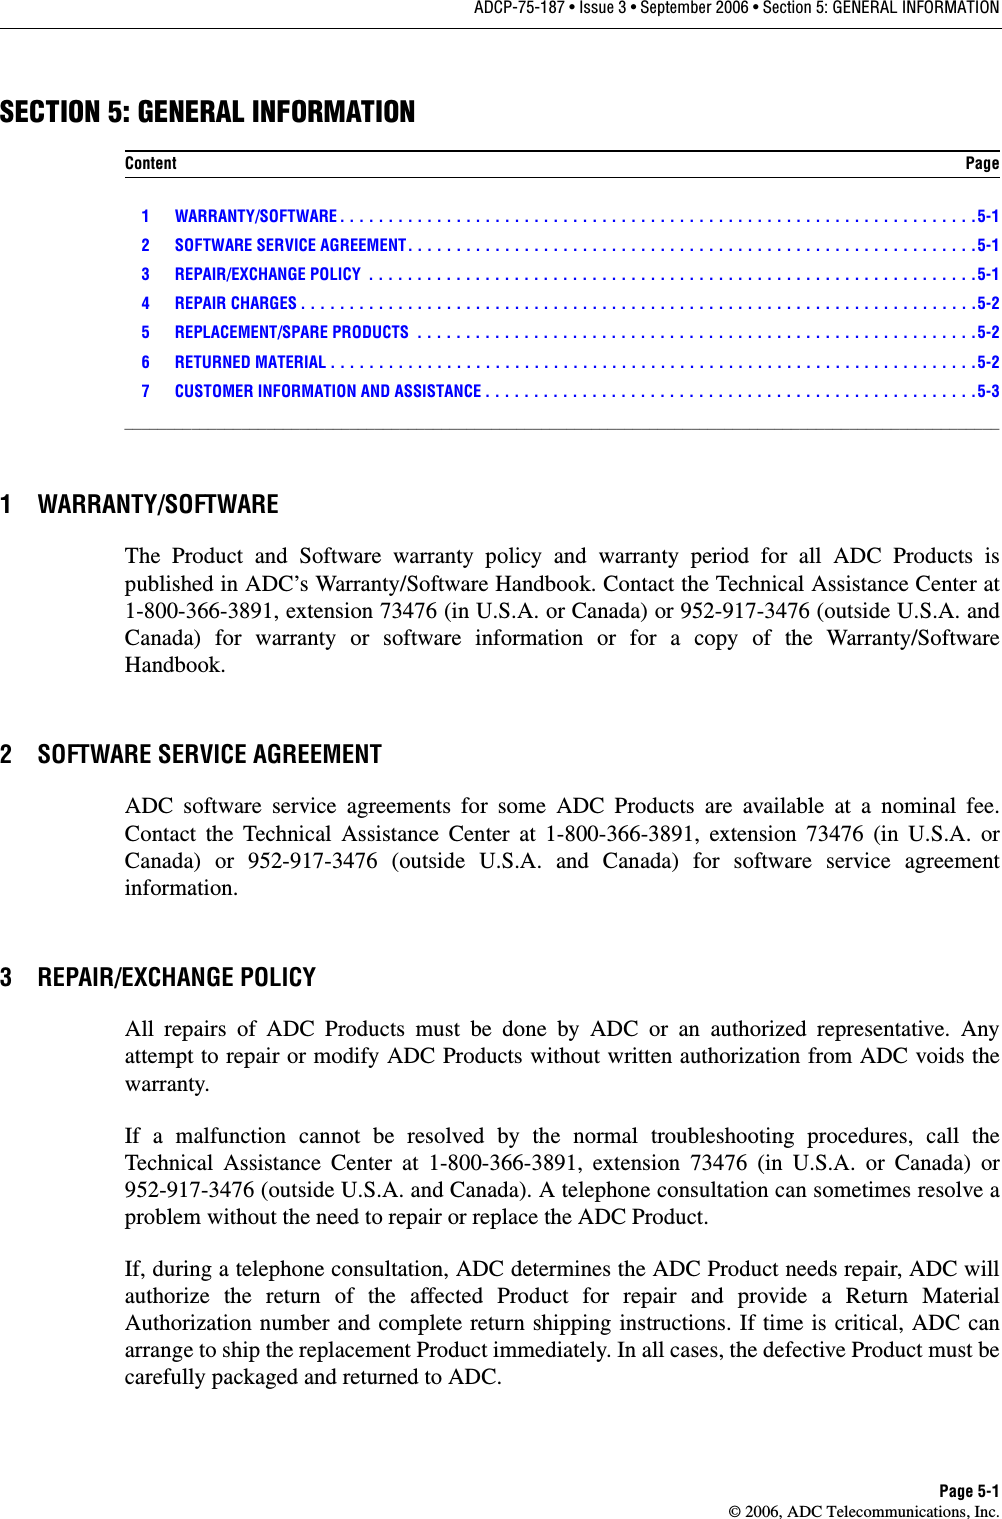 ADCP-75-187 • Issue 3 • September 2006 • Section 5: GENERAL INFORMATIONPage 5-1© 2006, ADC Telecommunications, Inc.SECTION 5: GENERAL INFORMATION1 WARRANTY/SOFTWARE . . . . . . . . . . . . . . . . . . . . . . . . . . . . . . . . . . . . . . . . . . . . . . . . . . . . . . . . . . . . . . . . . .5-12 SOFTWARE SERVICE AGREEMENT. . . . . . . . . . . . . . . . . . . . . . . . . . . . . . . . . . . . . . . . . . . . . . . . . . . . . . . . . . .5-13 REPAIR/EXCHANGE POLICY  . . . . . . . . . . . . . . . . . . . . . . . . . . . . . . . . . . . . . . . . . . . . . . . . . . . . . . . . . . . . . . .5-14 REPAIR CHARGES . . . . . . . . . . . . . . . . . . . . . . . . . . . . . . . . . . . . . . . . . . . . . . . . . . . . . . . . . . . . . . . . . . . . . .5-25 REPLACEMENT/SPARE PRODUCTS  . . . . . . . . . . . . . . . . . . . . . . . . . . . . . . . . . . . . . . . . . . . . . . . . . . . . . . . . . .5-26 RETURNED MATERIAL . . . . . . . . . . . . . . . . . . . . . . . . . . . . . . . . . . . . . . . . . . . . . . . . . . . . . . . . . . . . . . . . . . .5-27 CUSTOMER INFORMATION AND ASSISTANCE . . . . . . . . . . . . . . . . . . . . . . . . . . . . . . . . . . . . . . . . . . . . . . . . . . .5-3_________________________________________________________________________________________________________1 WARRANTY/SOFTWAREThe Product and Software warranty policy and warranty period for all ADC Products ispublished in ADC’s Warranty/Software Handbook. Contact the Technical Assistance Center at1-800-366-3891, extension 73476 (in U.S.A. or Canada) or 952-917-3476 (outside U.S.A. andCanada) for warranty or software information or for a copy of the Warranty/SoftwareHandbook.2 SOFTWARE SERVICE AGREEMENTADC software service agreements for some ADC Products are available at a nominal fee.Contact the Technical Assistance Center at 1-800-366-3891, extension 73476 (in U.S.A. orCanada) or 952-917-3476 (outside U.S.A. and Canada) for software service agreementinformation.3 REPAIR/EXCHANGE POLICYAll repairs of ADC Products must be done by ADC or an authorized representative. Anyattempt to repair or modify ADC Products without written authorization from ADC voids thewarranty.If a malfunction cannot be resolved by the normal troubleshooting procedures, call theTechnical Assistance Center at 1-800-366-3891, extension 73476 (in U.S.A. or Canada) or952-917-3476 (outside U.S.A. and Canada). A telephone consultation can sometimes resolve aproblem without the need to repair or replace the ADC Product.If, during a telephone consultation, ADC determines the ADC Product needs repair, ADC willauthorize the return of the affected Product for repair and provide a Return MaterialAuthorization number and complete return shipping instructions. If time is critical, ADC canarrange to ship the replacement Product immediately. In all cases, the defective Product must becarefully packaged and returned to ADC.Content Page